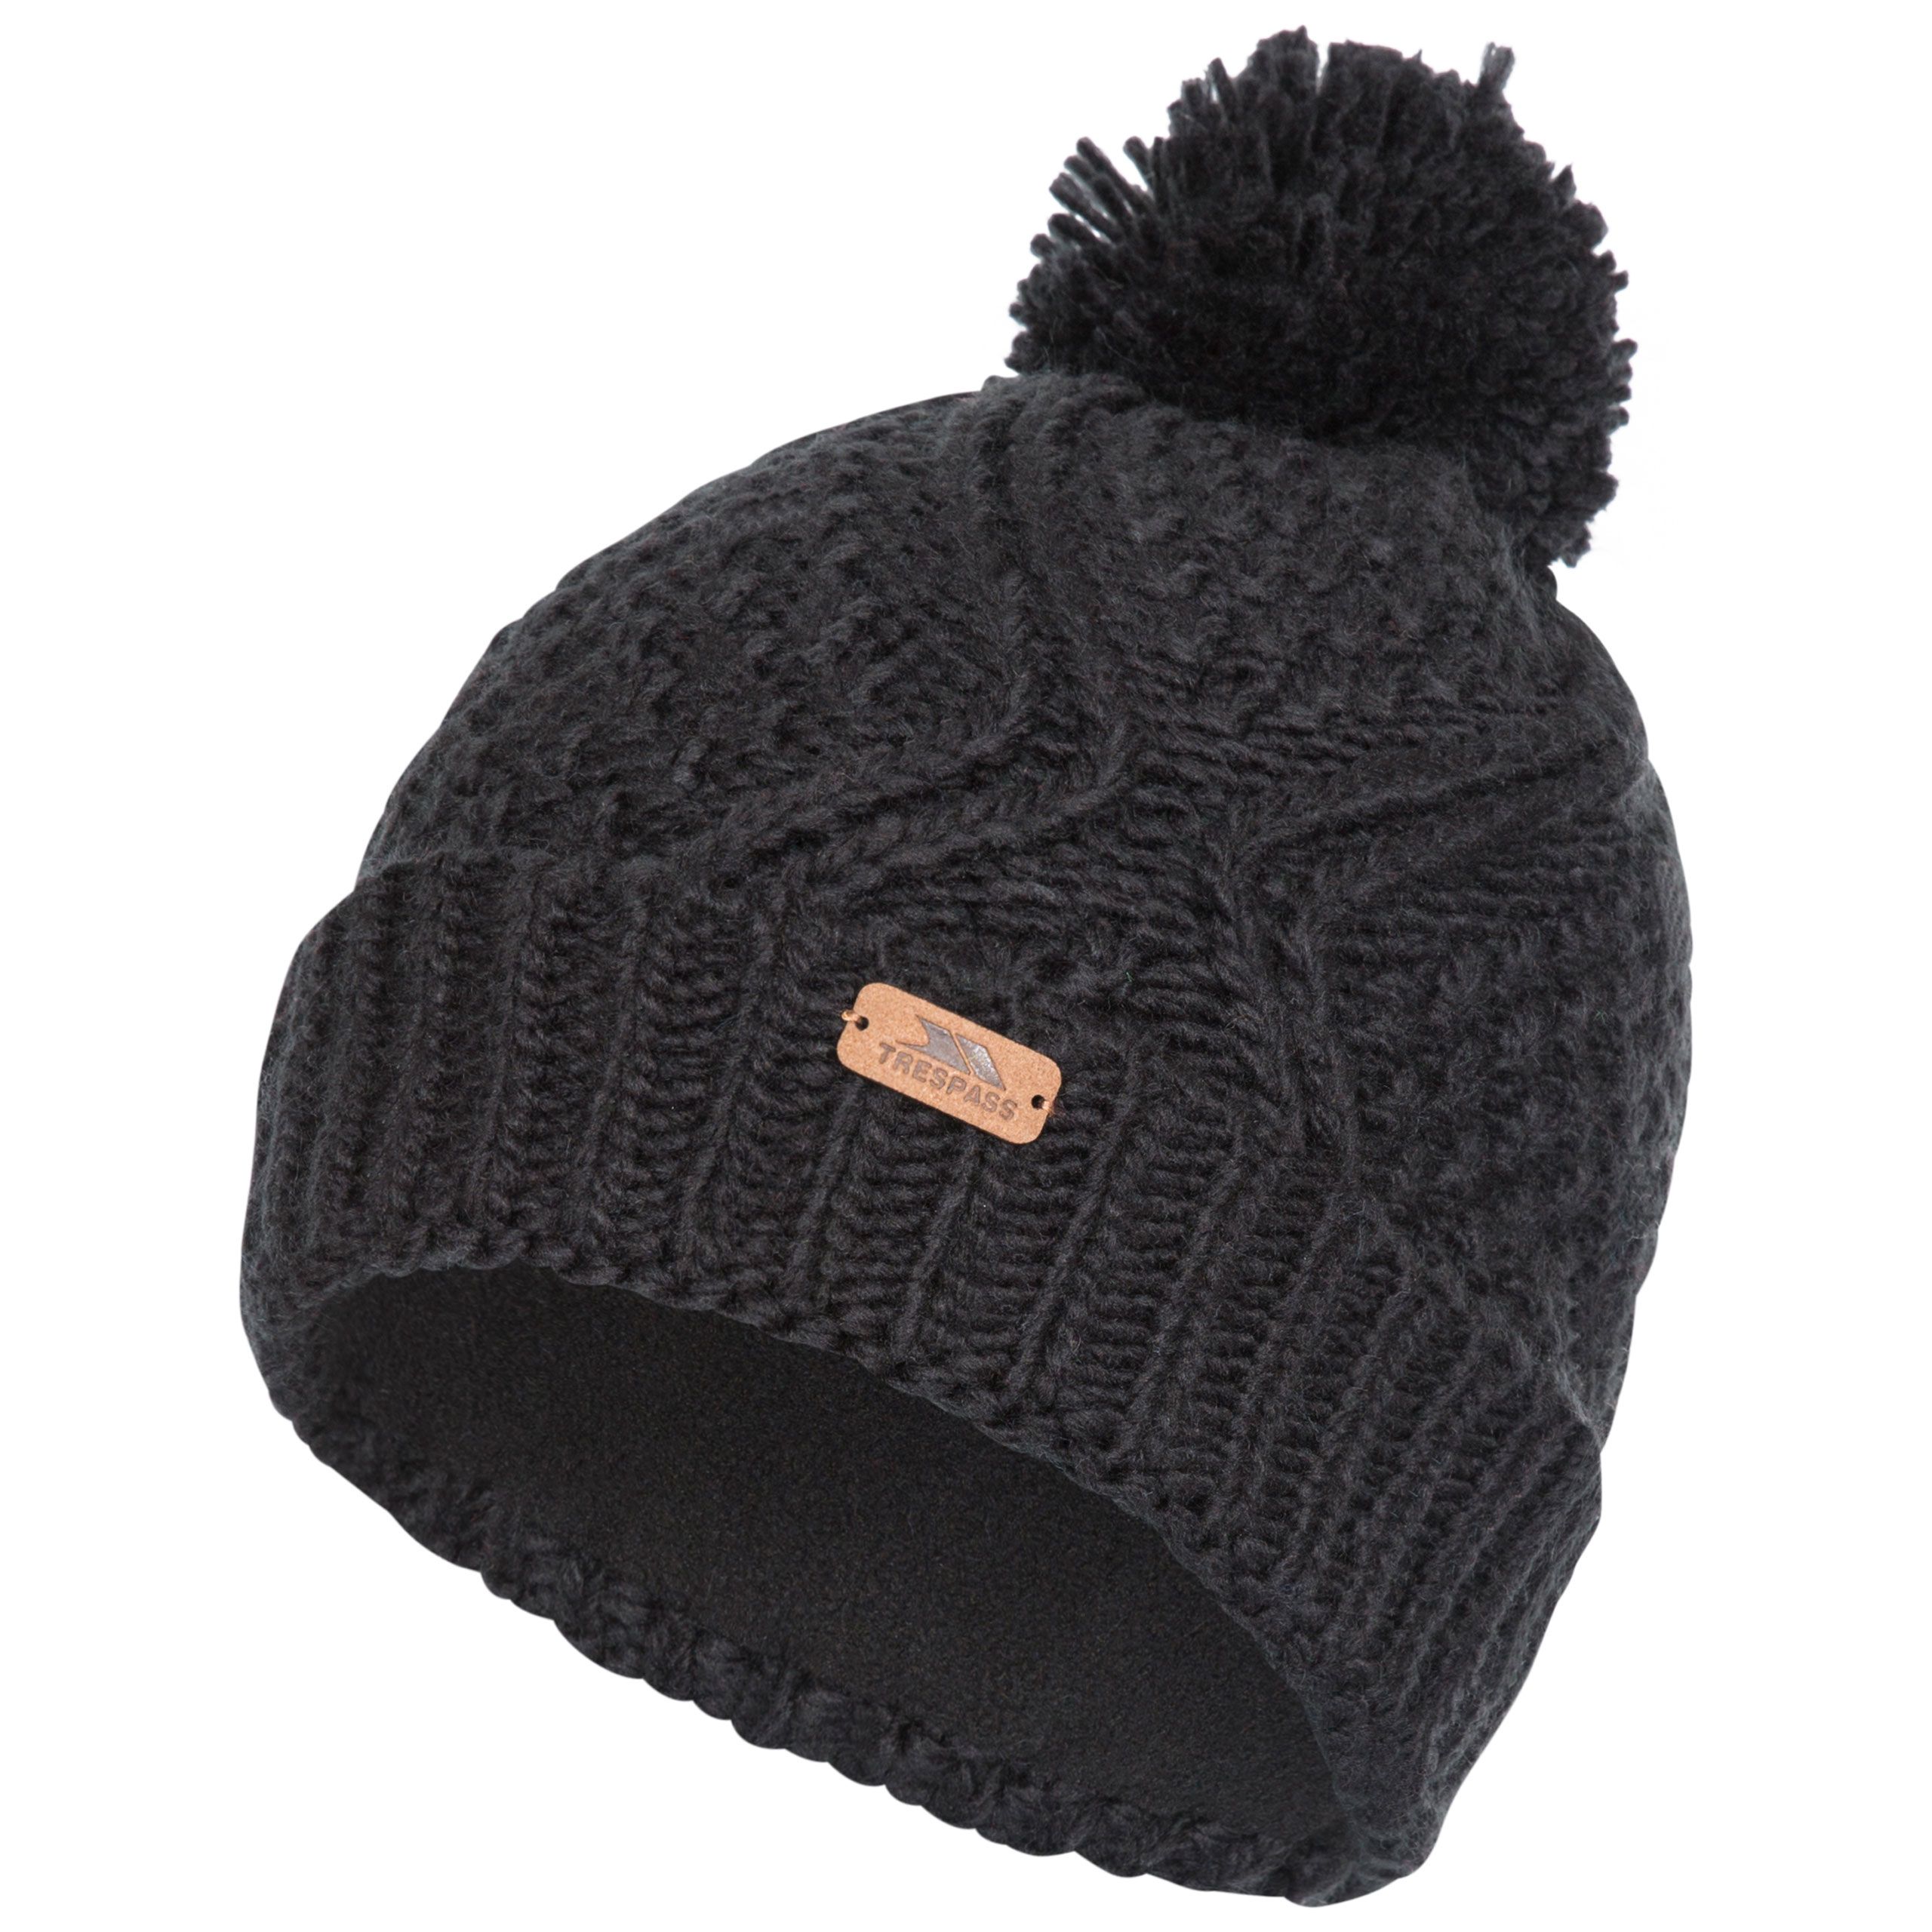 Zyra Womens Knitted Bobble Hat